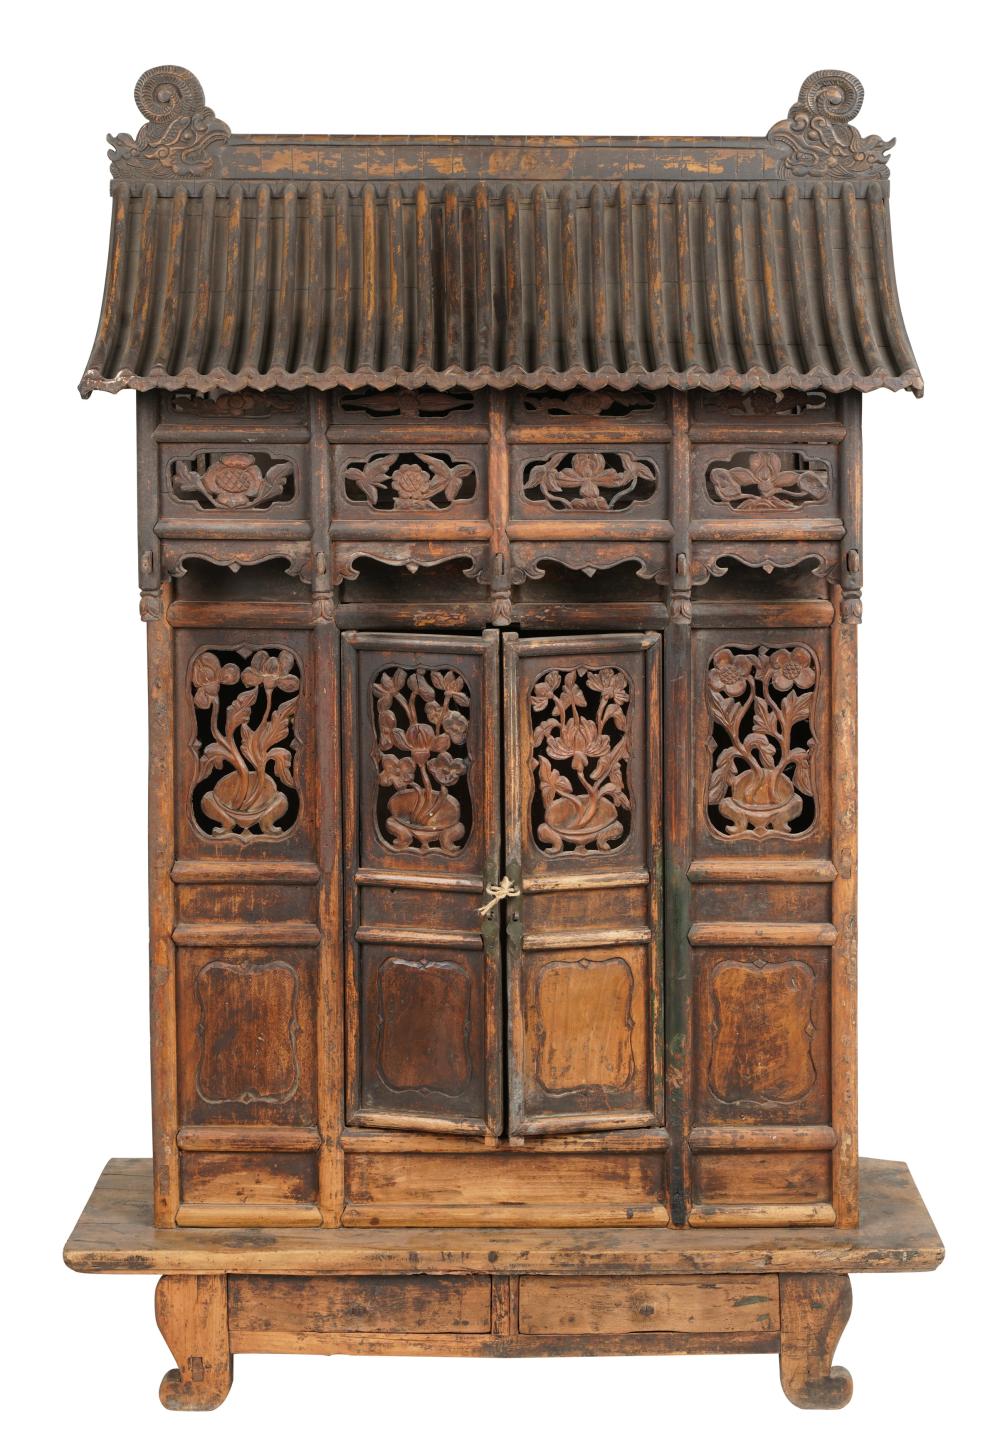 ANTIQUE CHINESE CARVED WOOD SHRINEAntique 3034ac